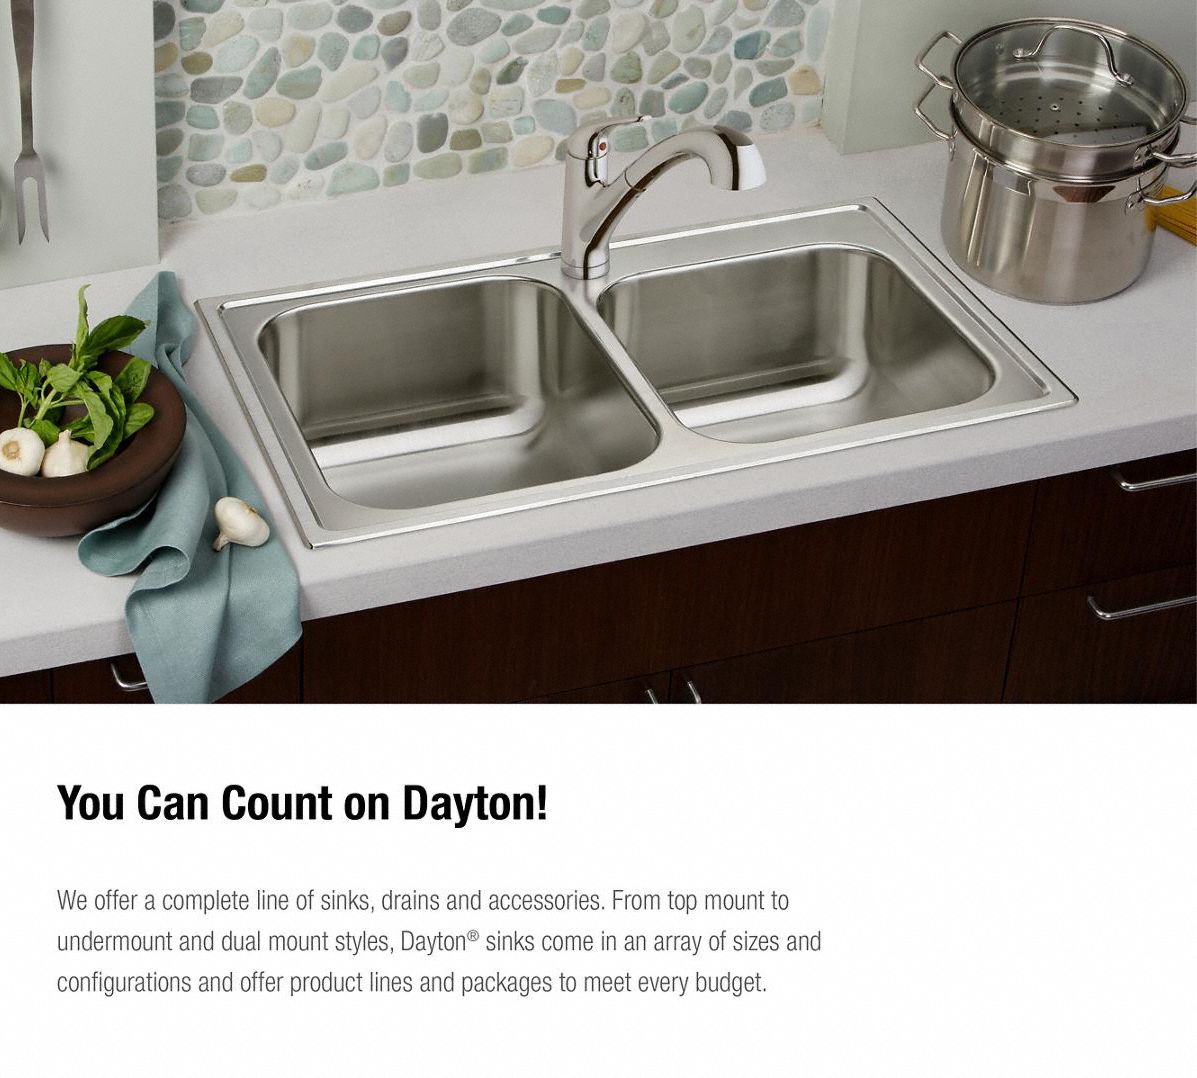 MK-042/3AEG3*A L 25 In ELKAY D125223 Drop-In Sink with Faucet Ledge 